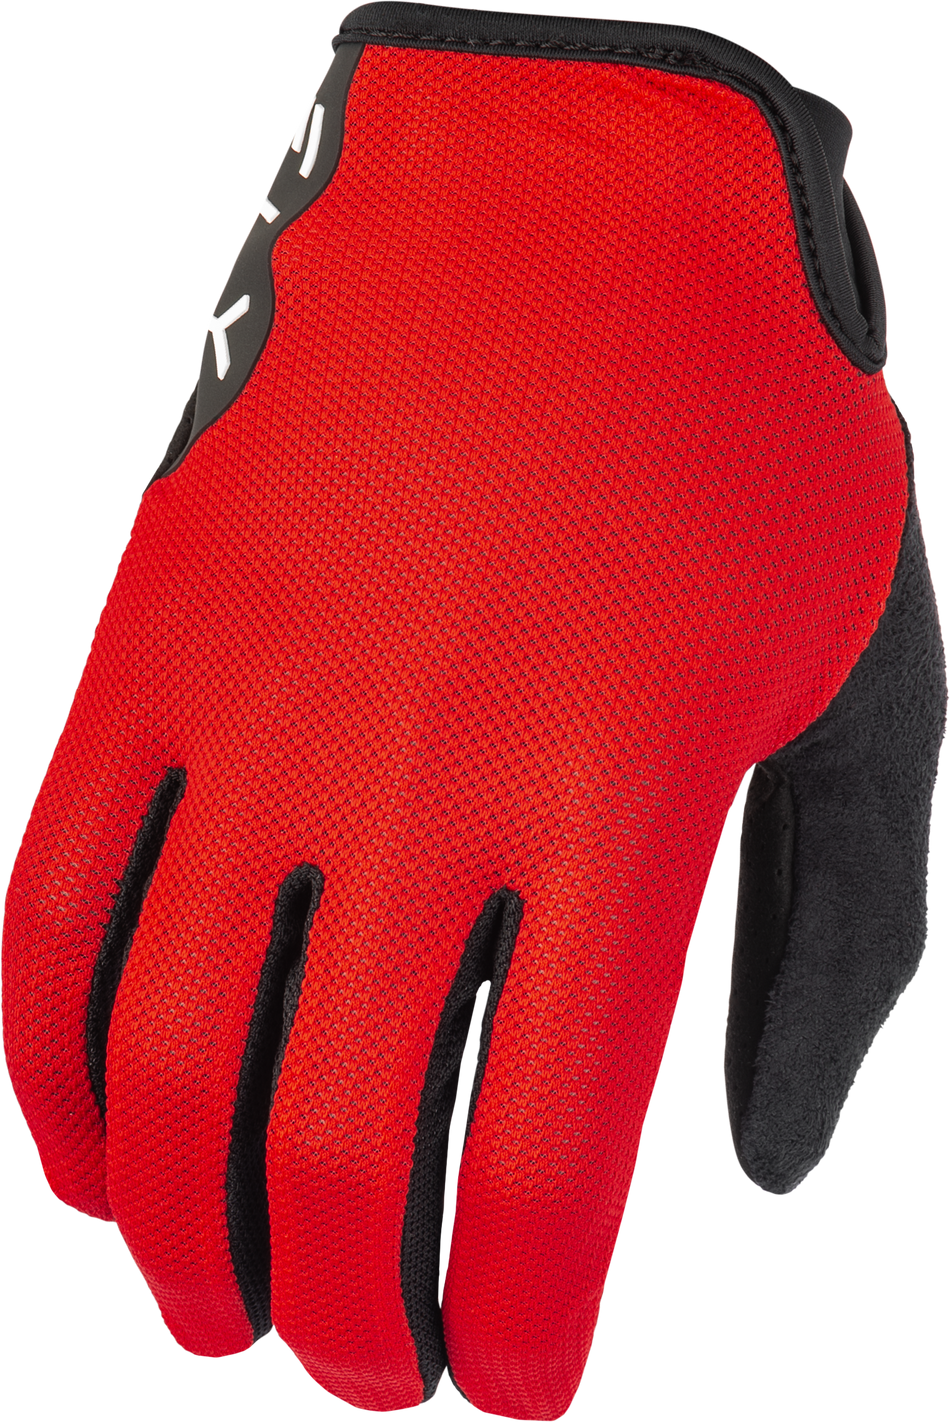 FLY RACING Mesh Gloves Red Lg 375-337L